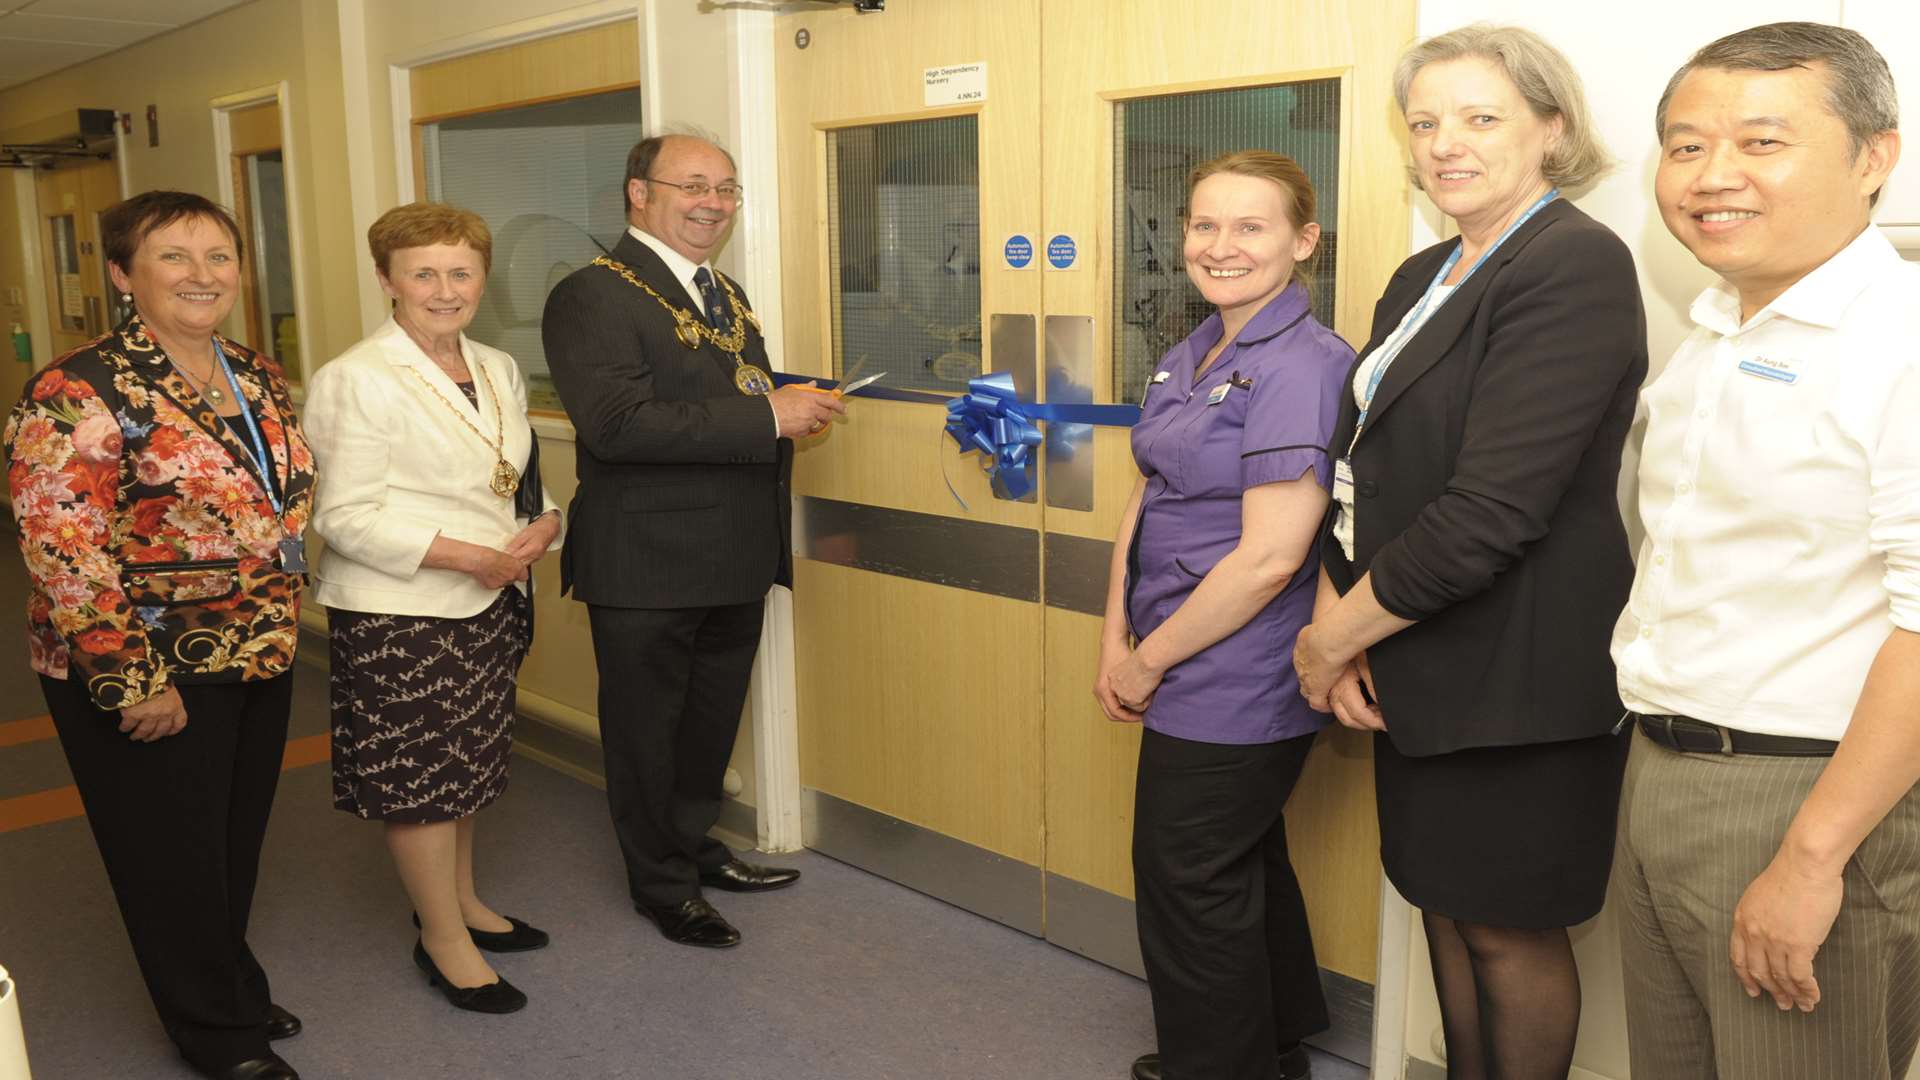 Opening the new unit, from left to right, the new chief executive Lesley Dwyer, Joyce and Barry Kemp, Louise Proffitt, Shena Winning and Dr Aung Soe.